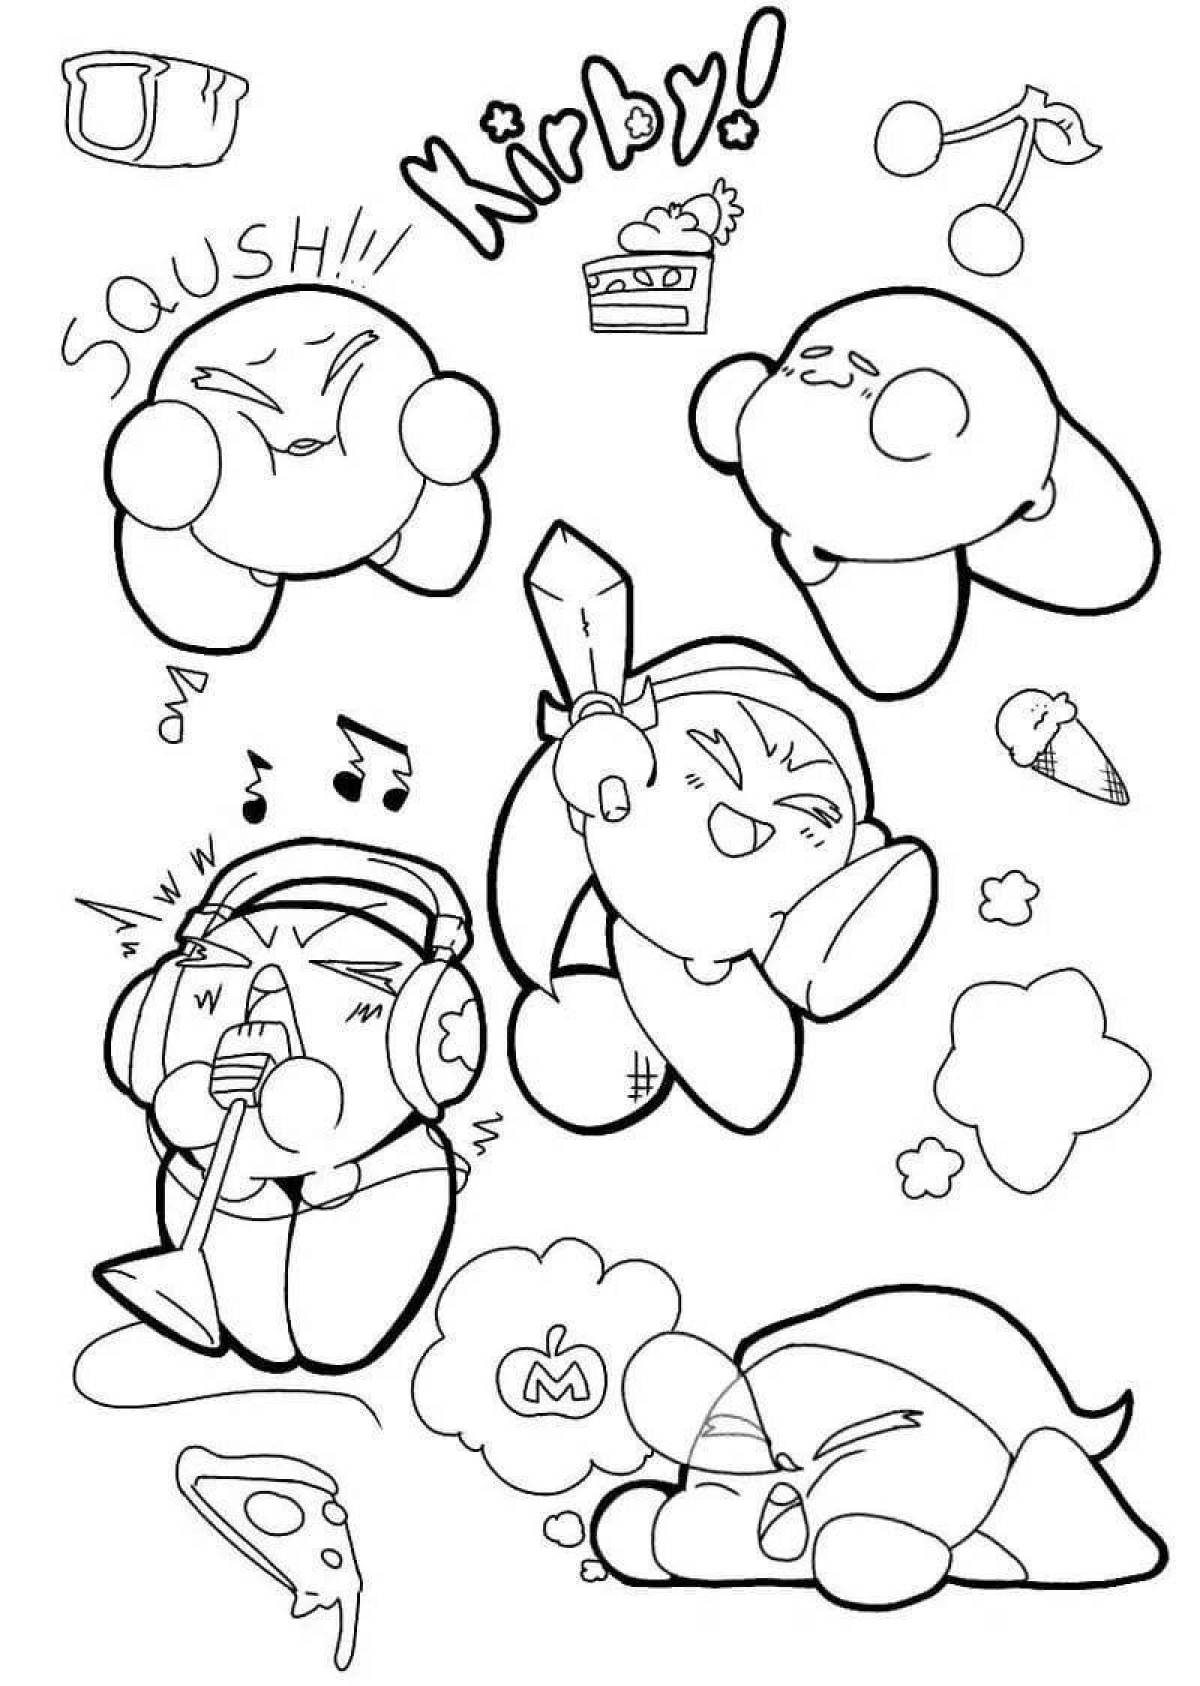 Playful kirby coloring page